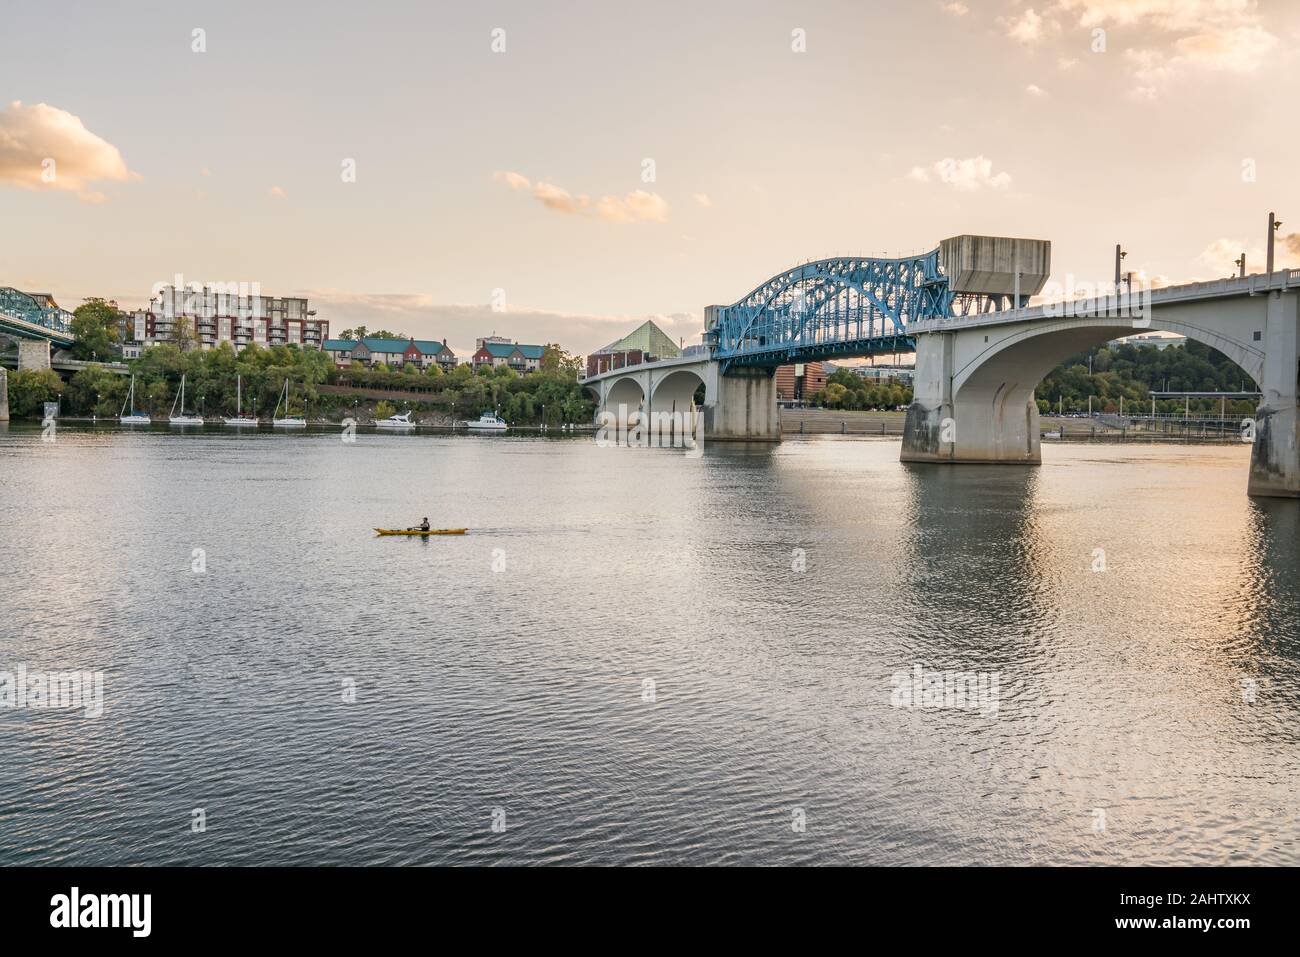 Chattanooga, TN - October 8, 2019: Chattanooga City Skyline along the Tennessee River at Sunset Stock Photo